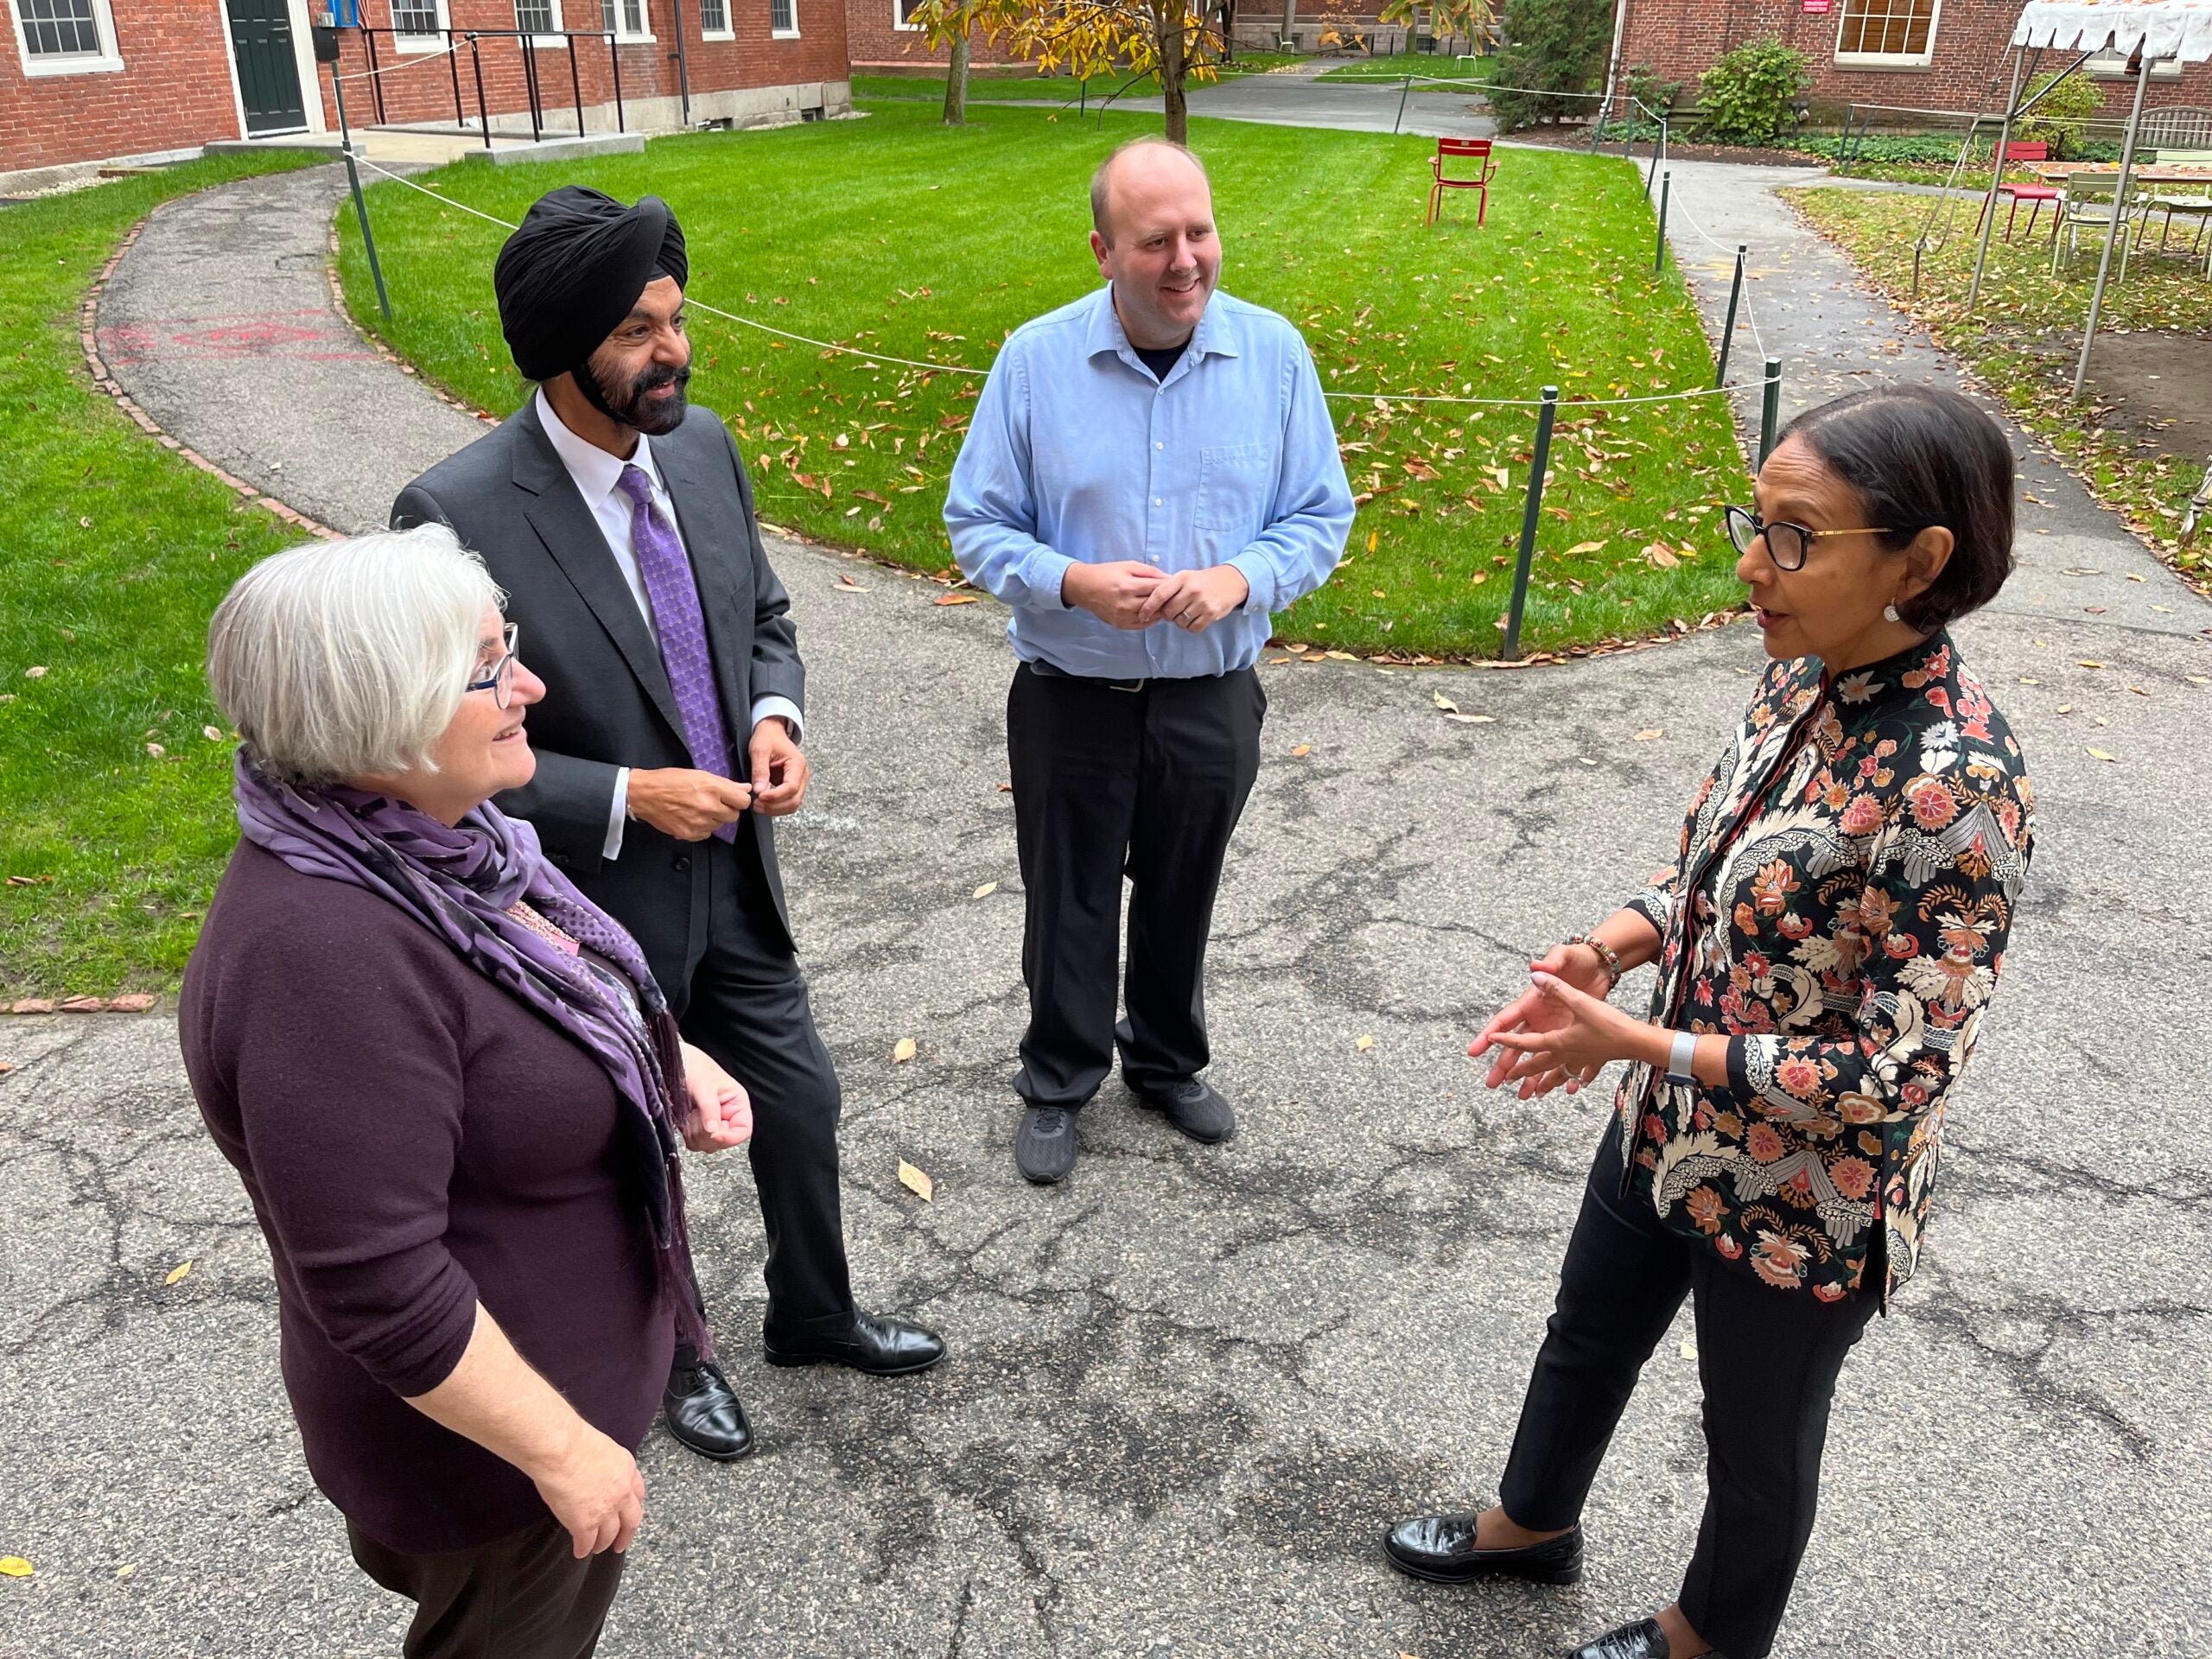 Julie Reuben, Ajay Banga, Travis Lovett, and Ritu Banga (pictured left to right) discuss the launch of the Banga Family Social Innovation Fund.